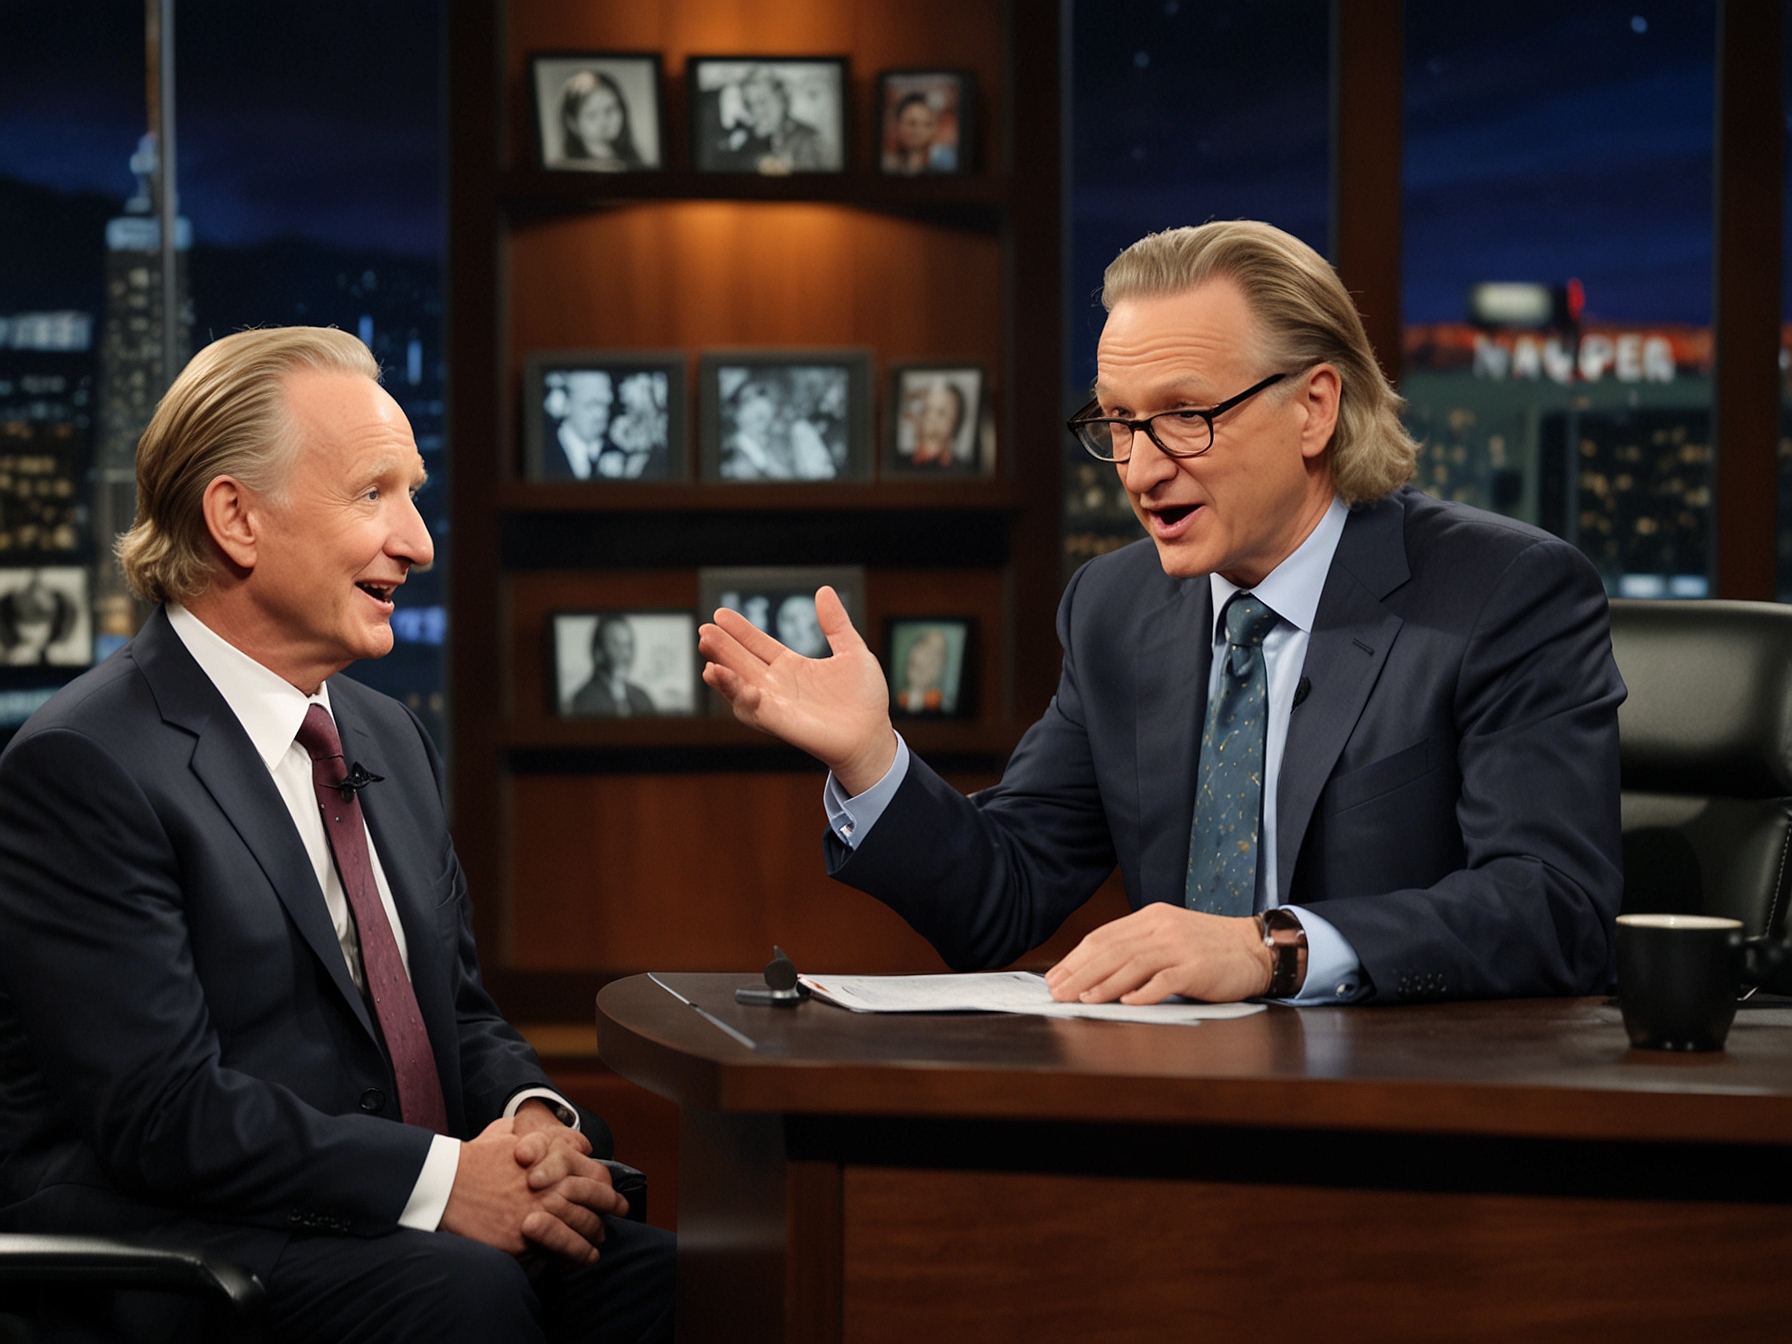 Jiminy Glick fumbles with cue cards while Bill Maher reacts with a bemused expression. This moment captures the spontaneous humor that defines the interview, blending Glick's awkwardness with Maher's sharp wit.